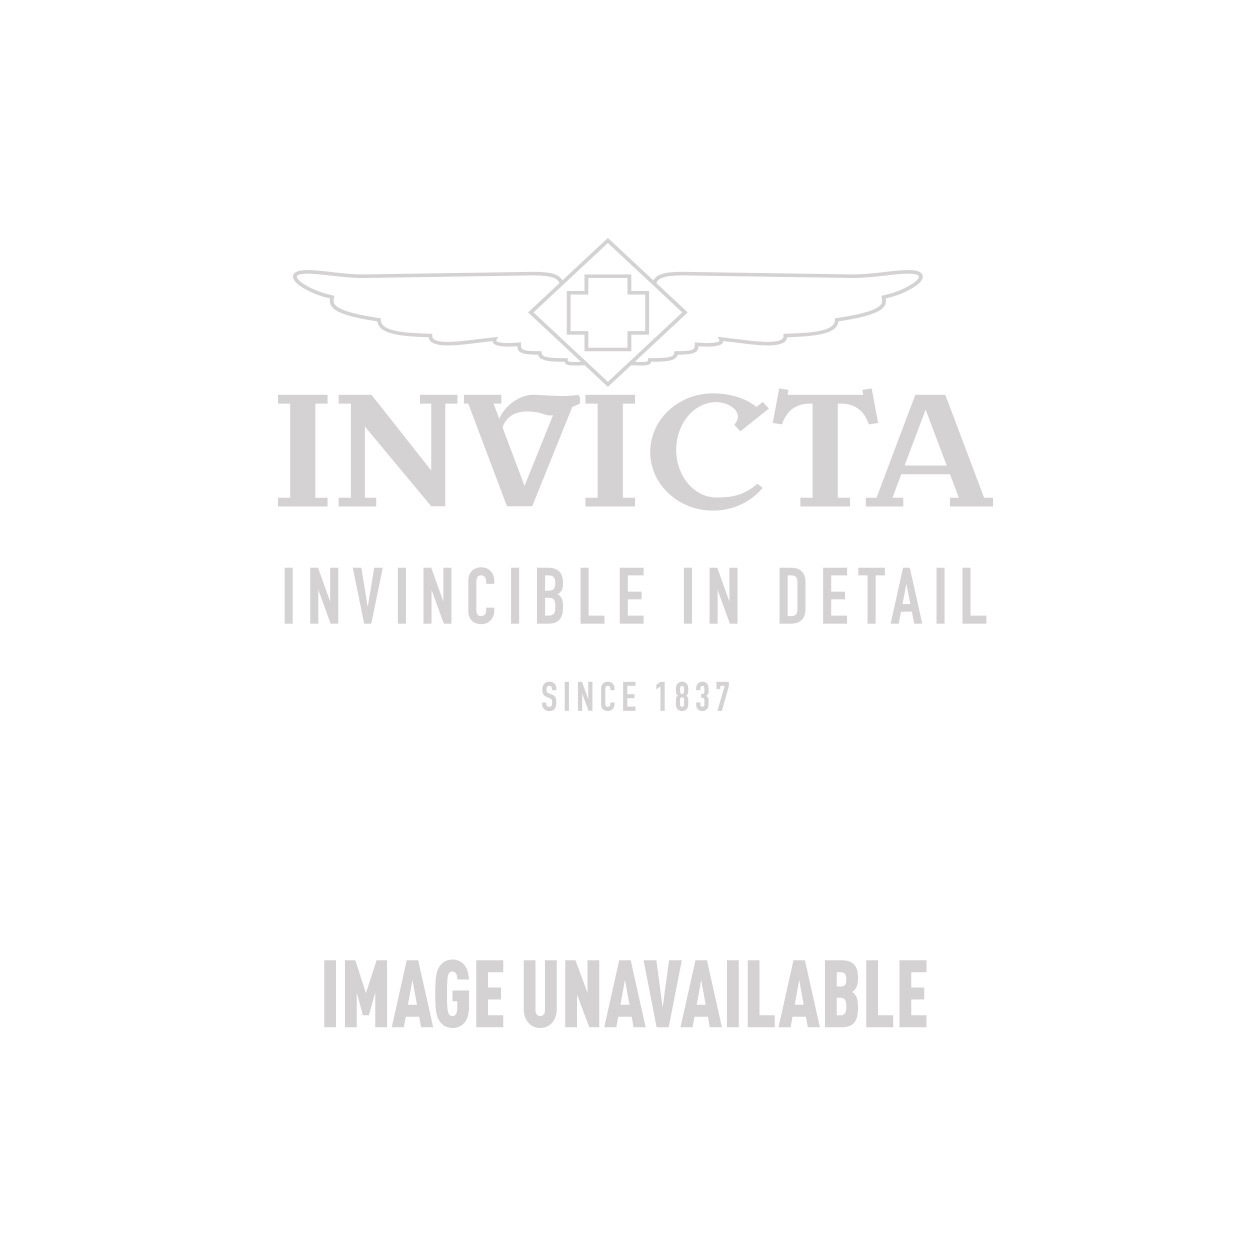 Invicta Watch Cleaning Kit (IG0036)